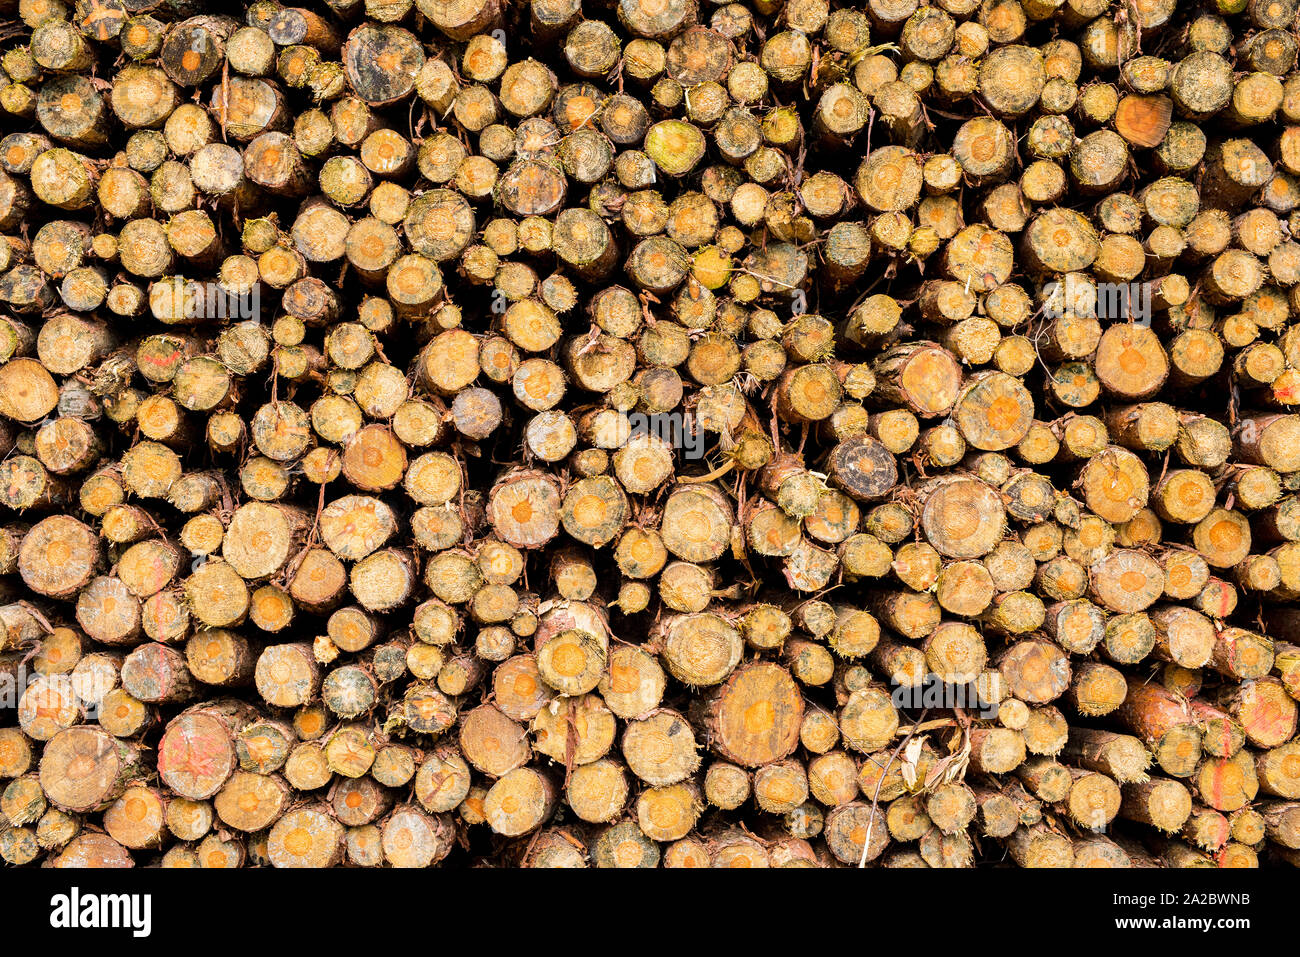 Pile of chopped fire wood Stock Photo